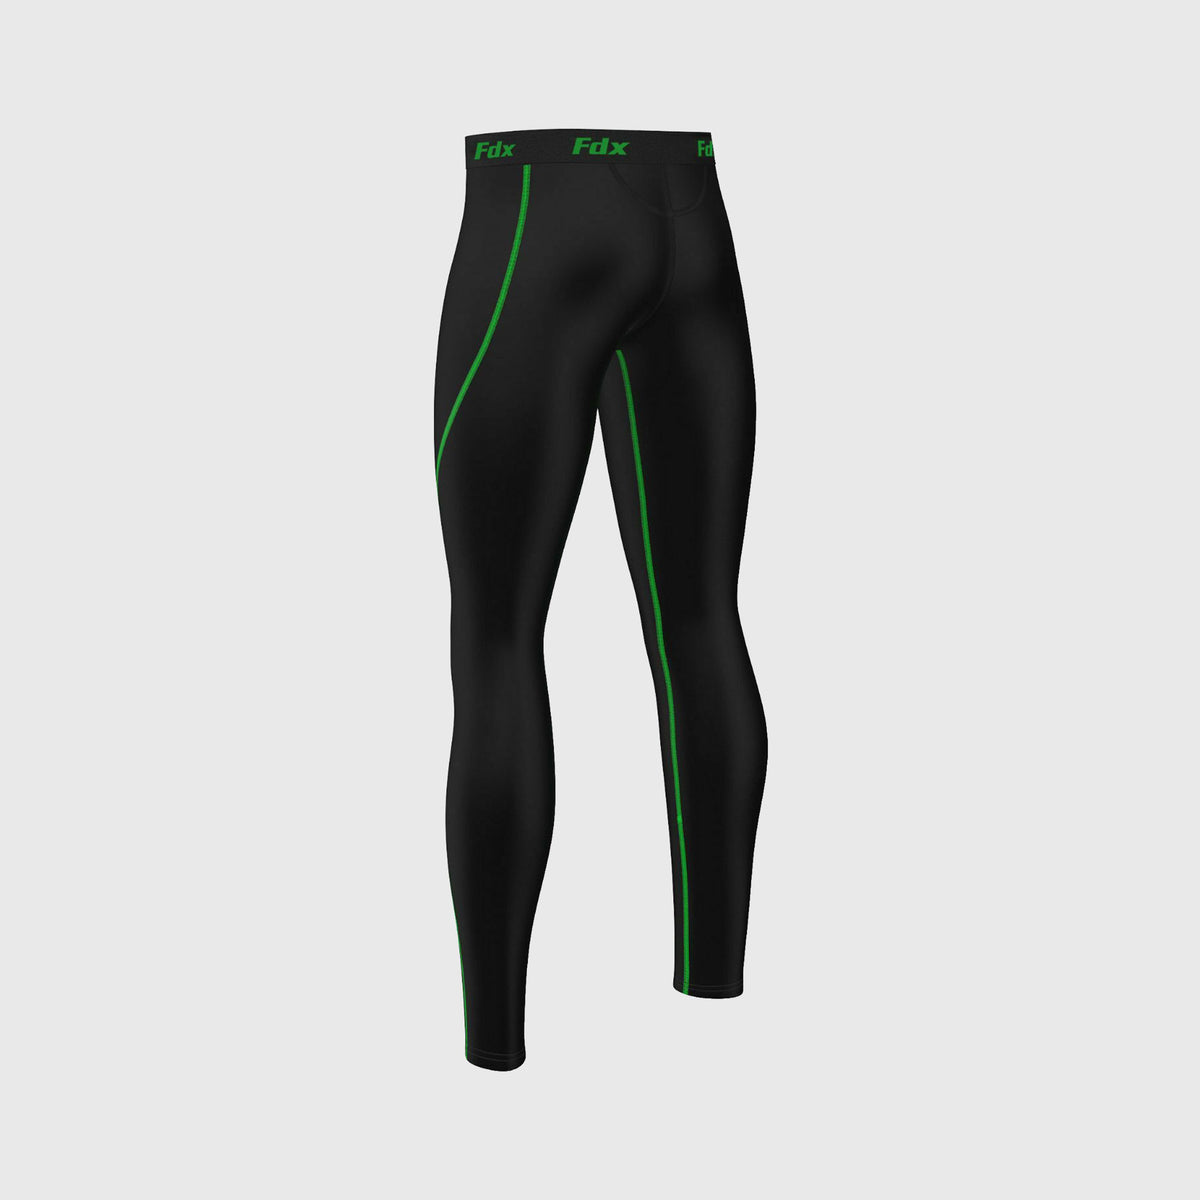 Lycra Spandex stretchable leggings for Girls and Women exercise